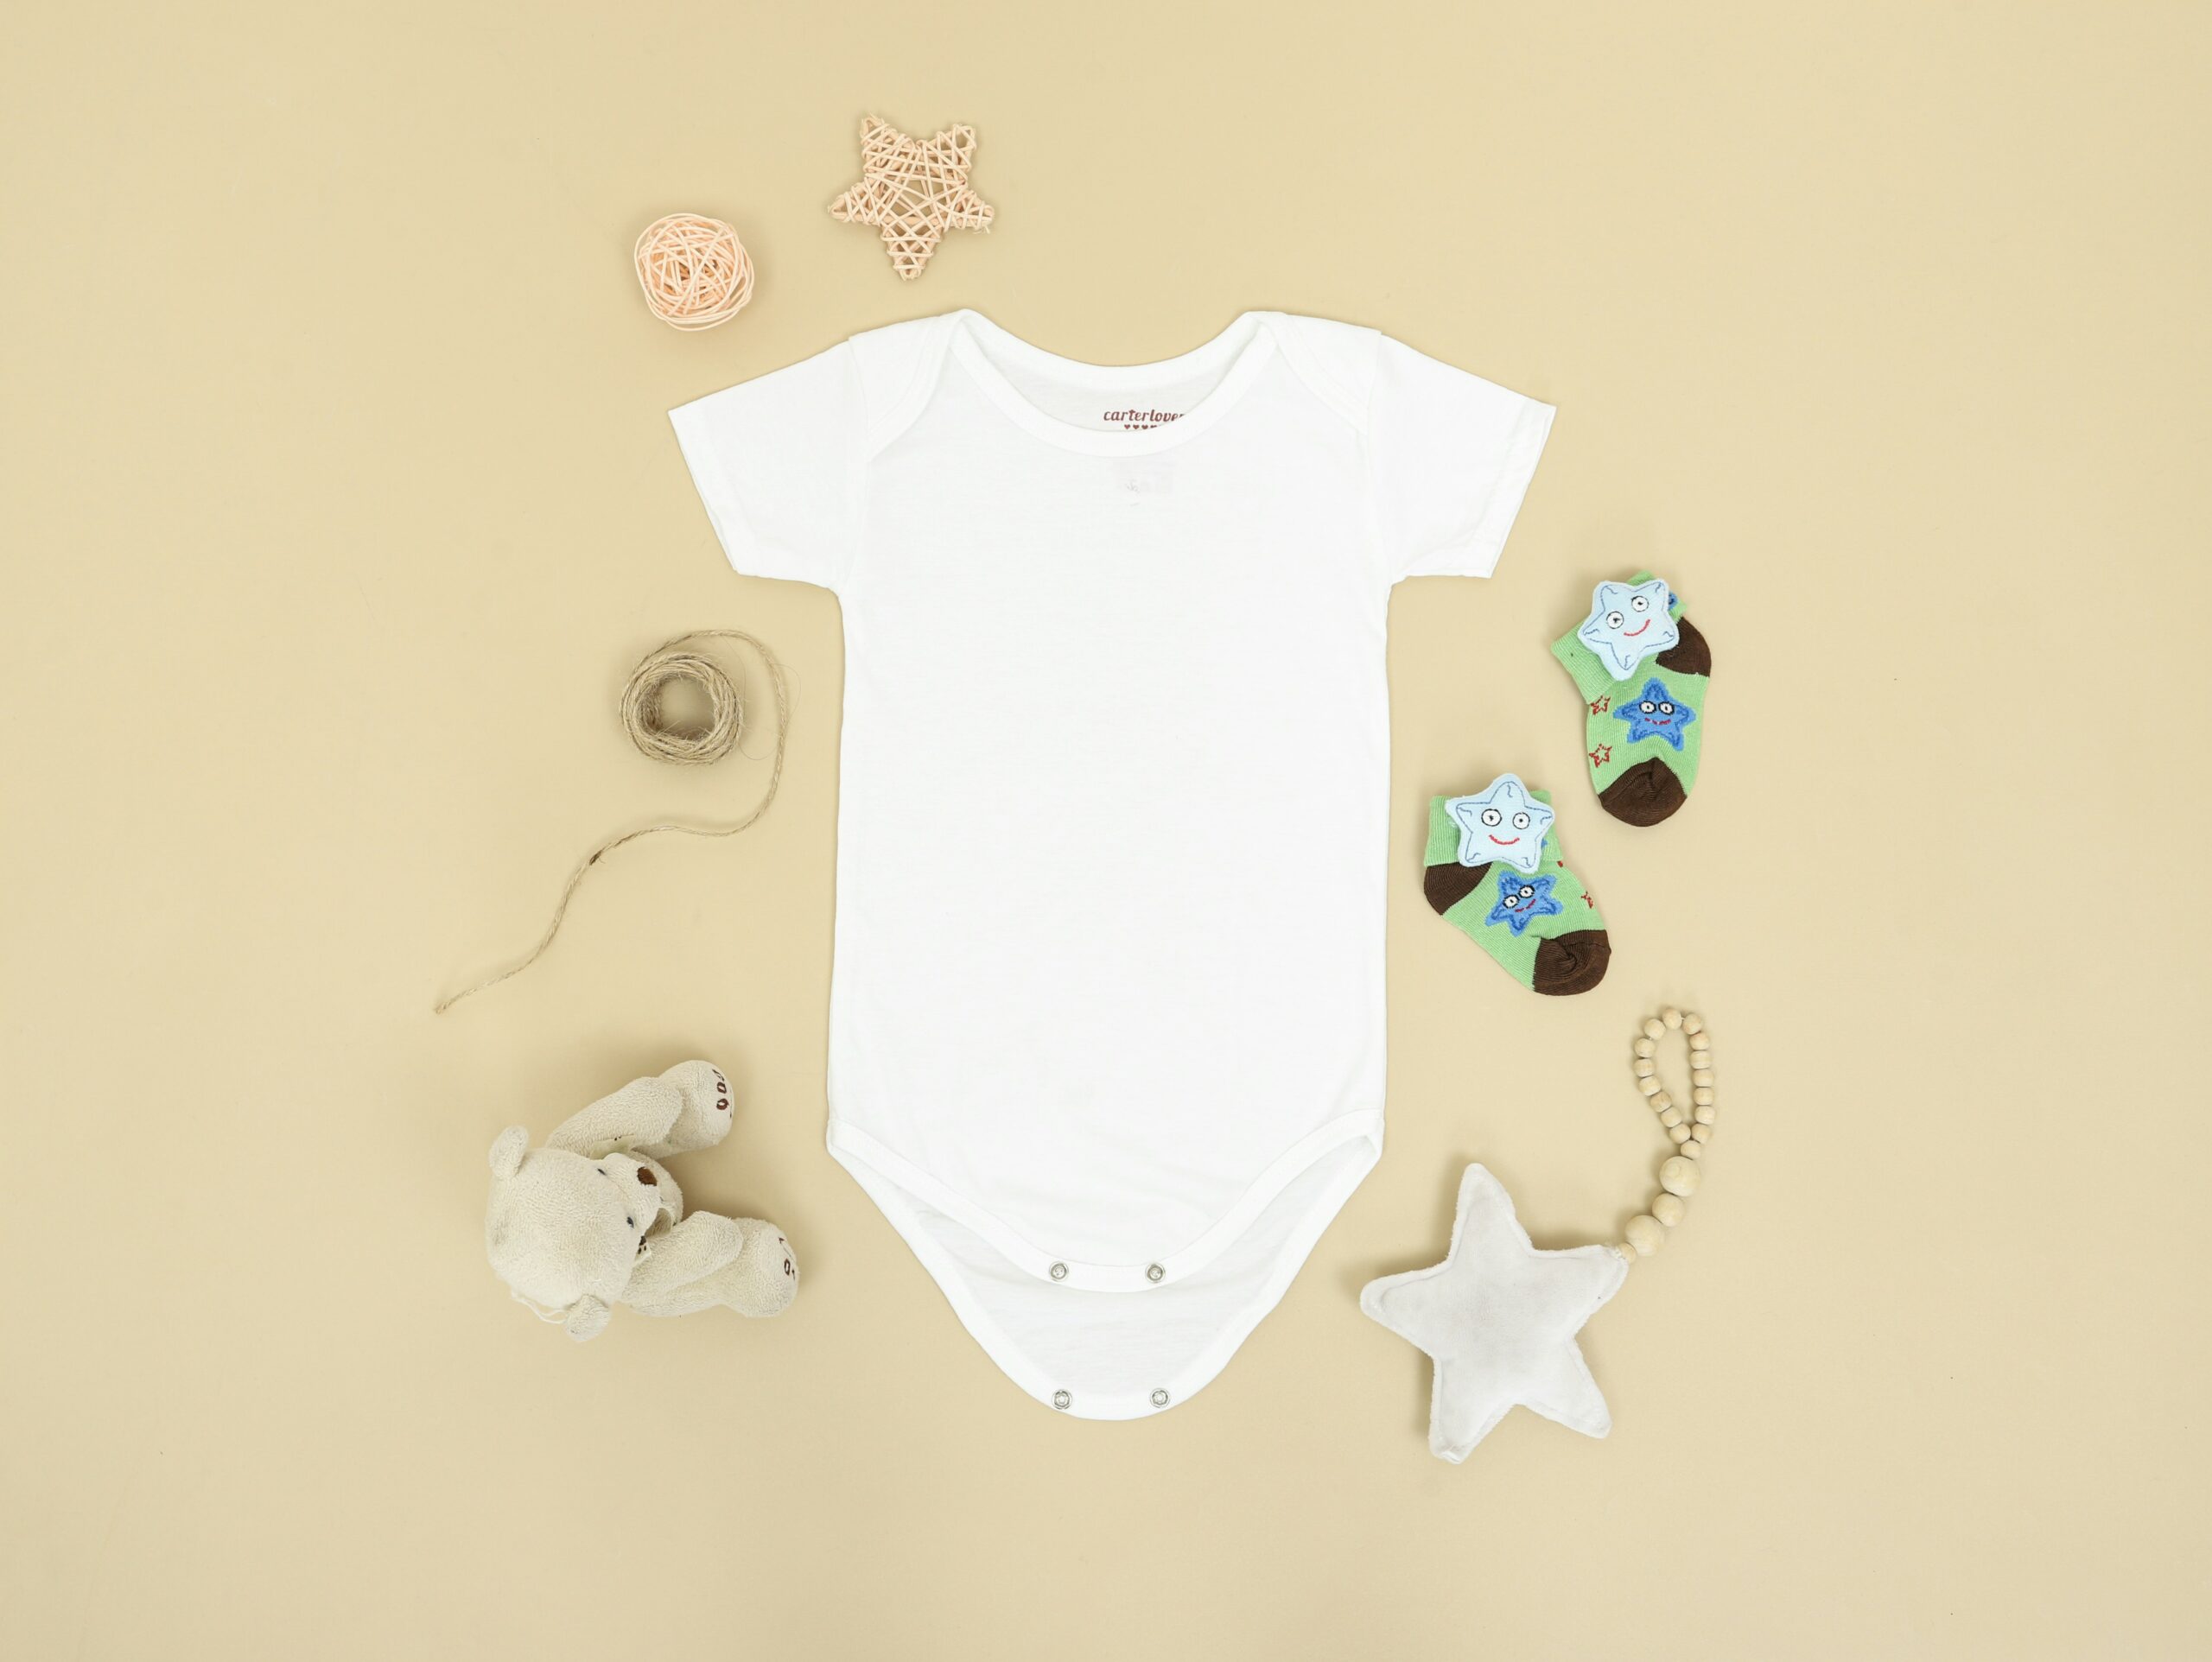 White baby onesie and other baby items